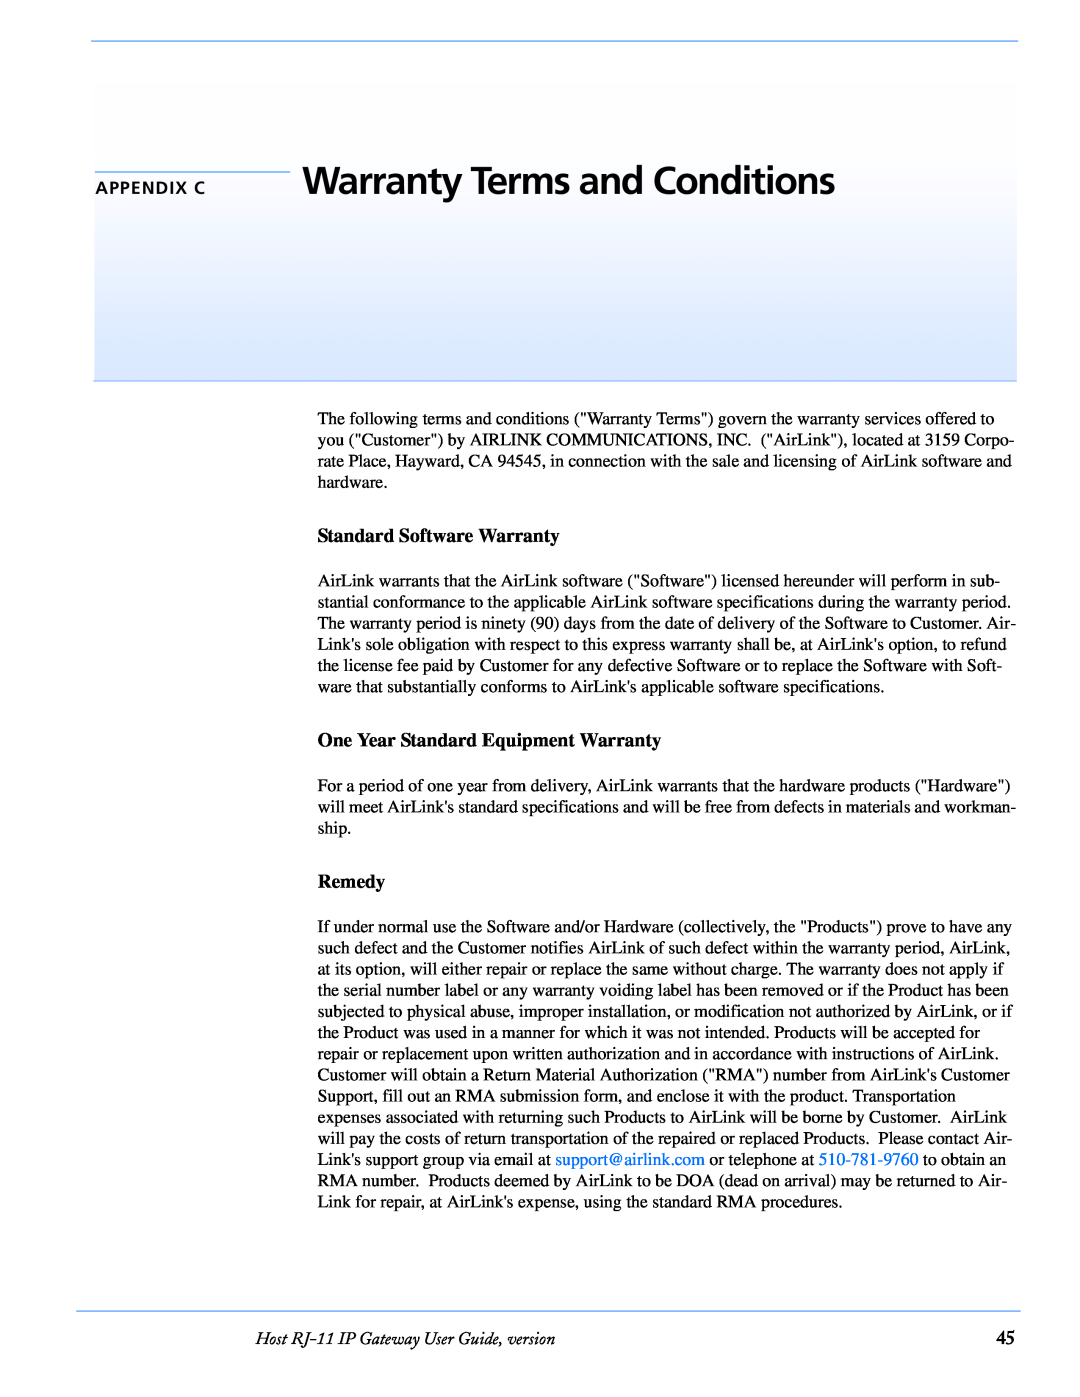 Airlink RJ-11 Warranty Terms and Conditions, Standard Software Warranty, One Year Standard Equipment Warranty, Remedy 